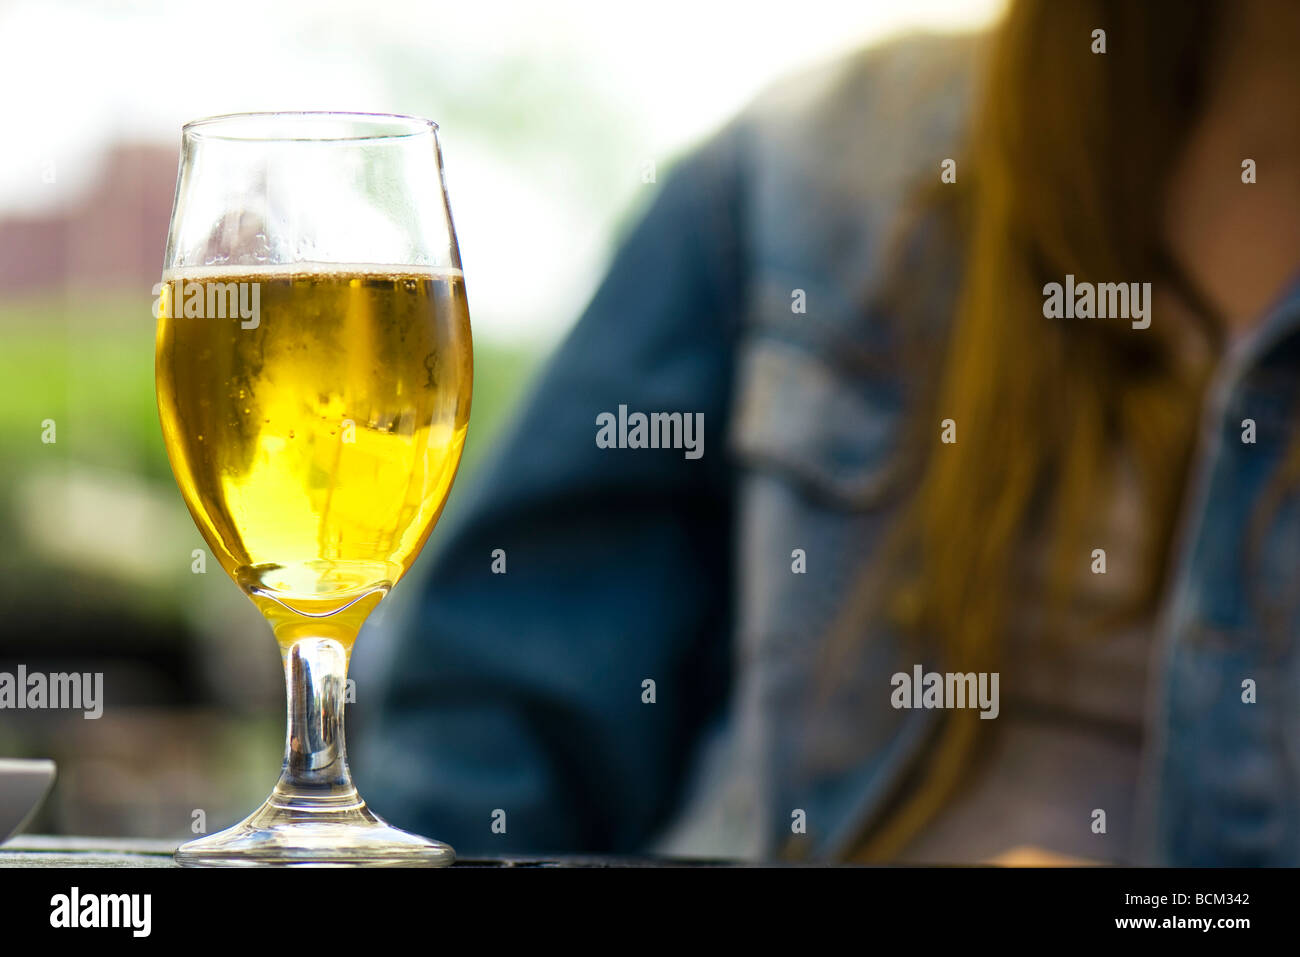 Glass of beer on table, young woman in background Stock Photo